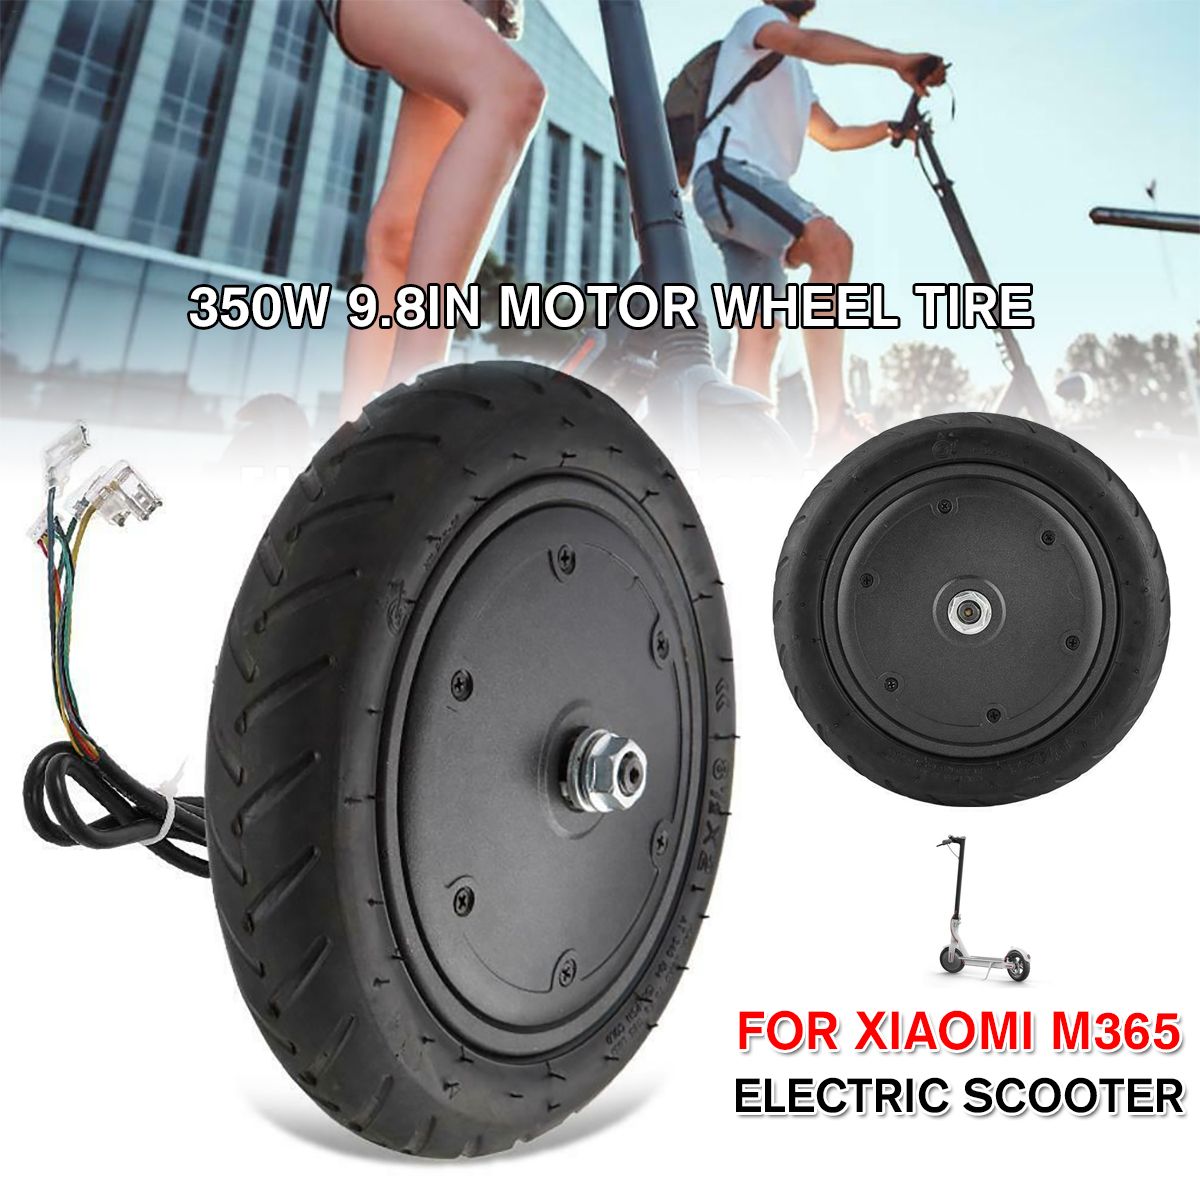 350W-98-Inch-Motor-Explosion-Proof-Wheels-Tire-for-M365-Electric-Scooter-Ideal-Replacement-1579846